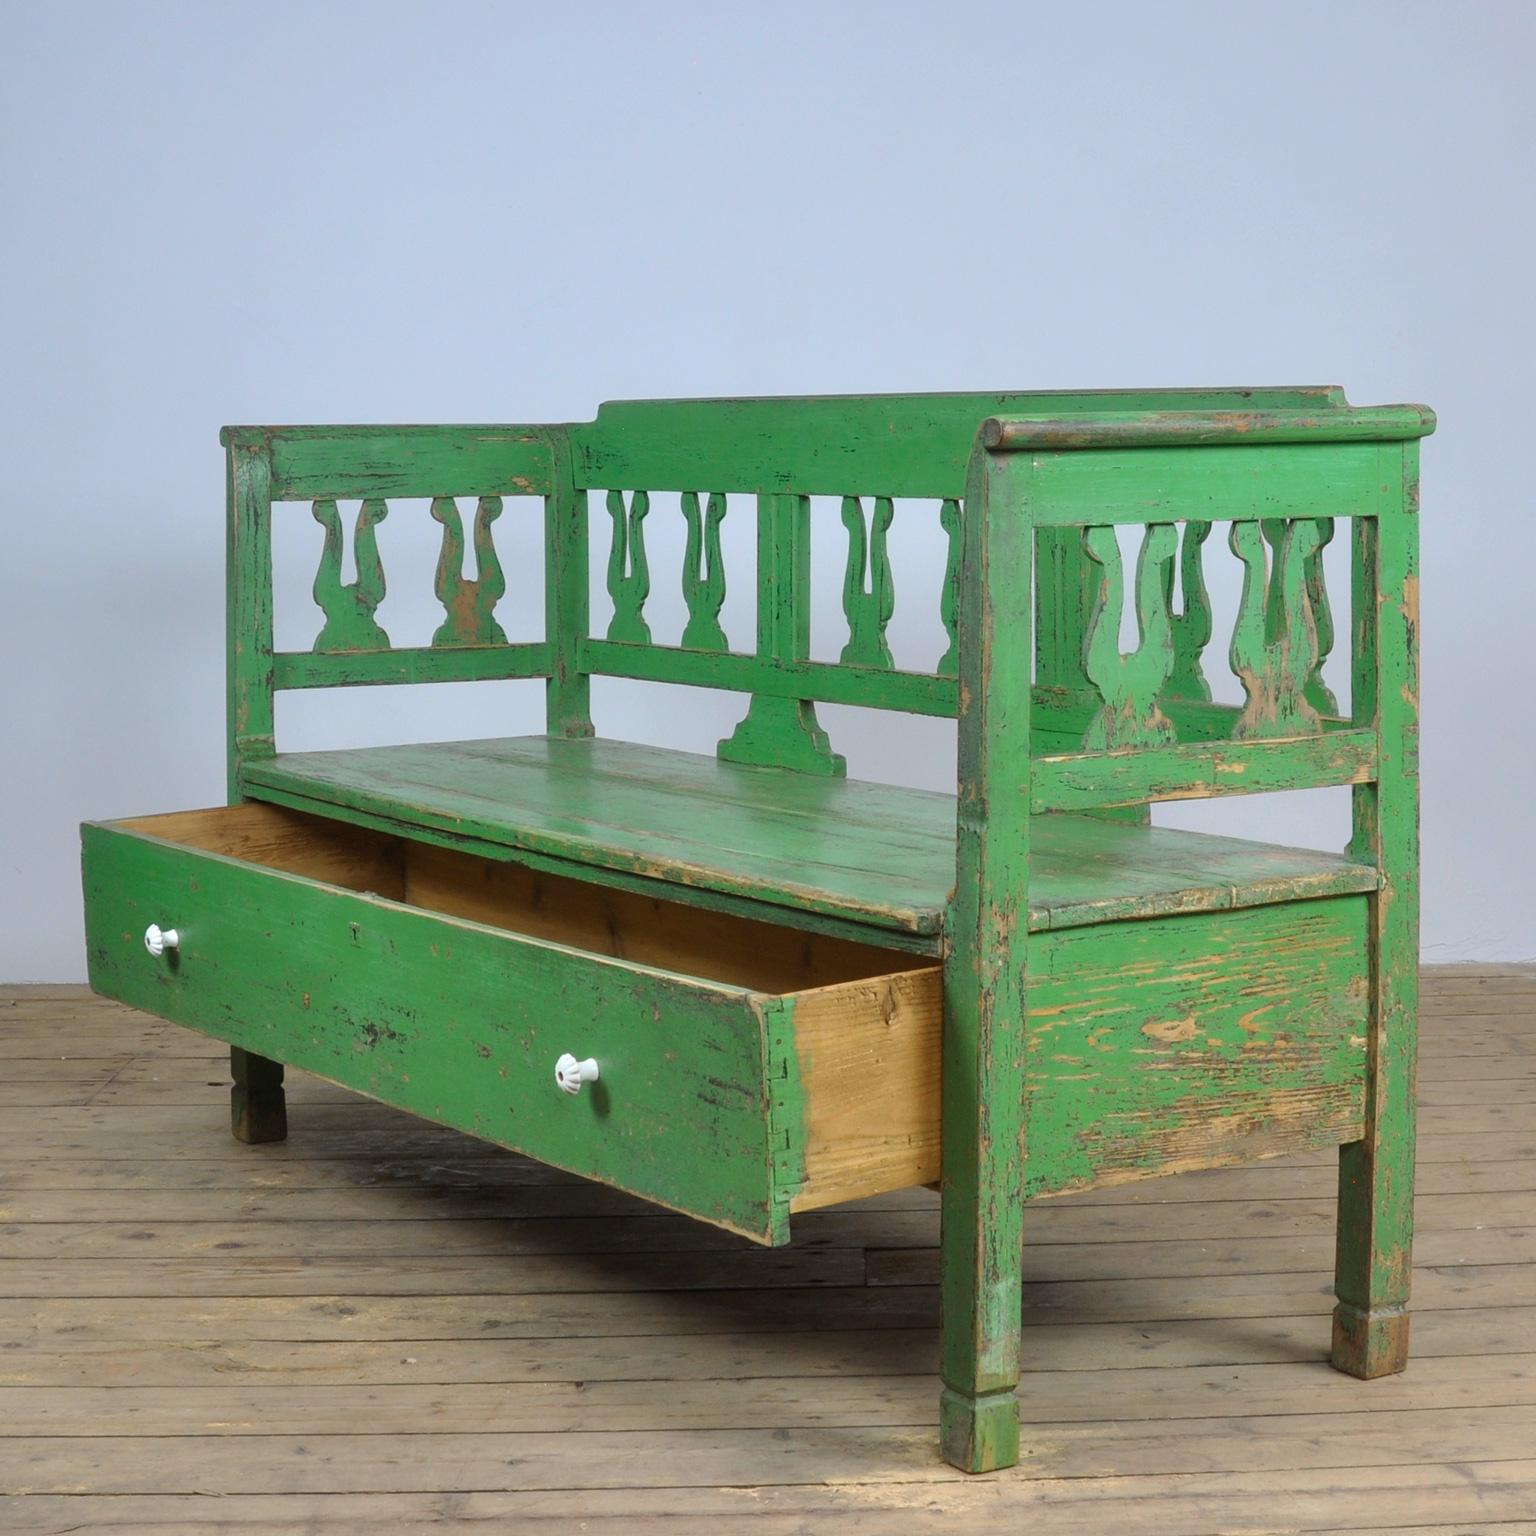 A charming box bench from Hungary, painted a striking shade of green. Under the seat a draw with large storage space.